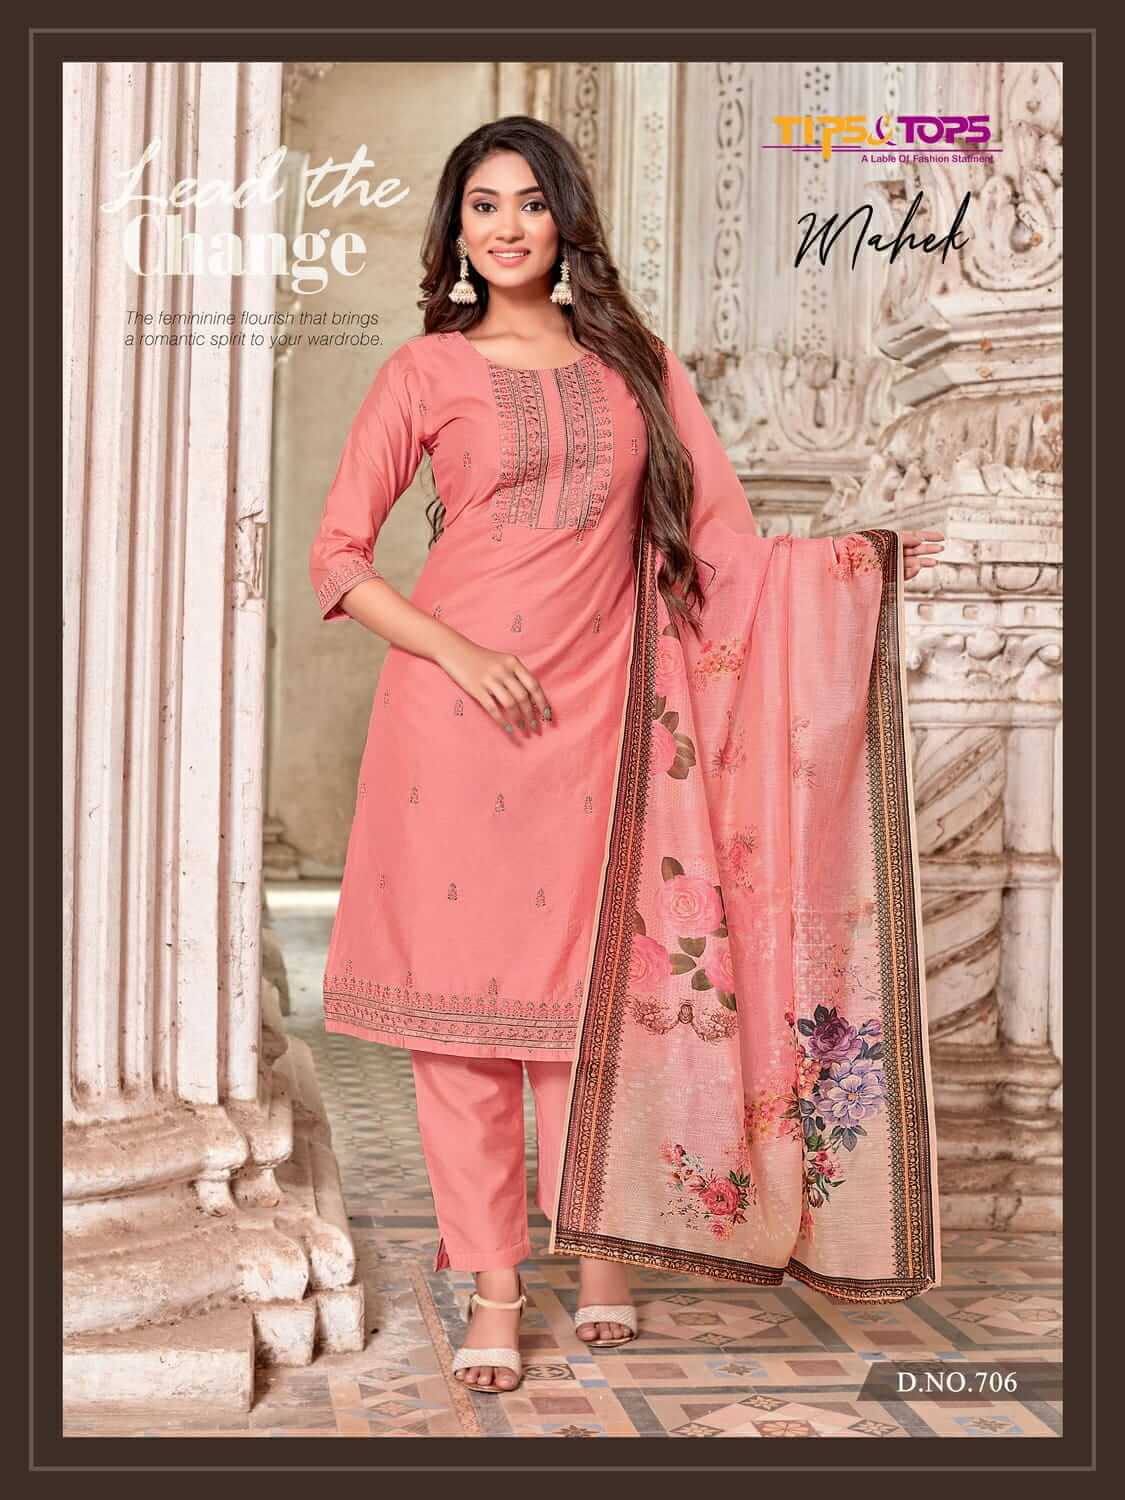 Tips And Tops Mahek Vol 7 Designer Wedding Party Salwar Suit collection 5